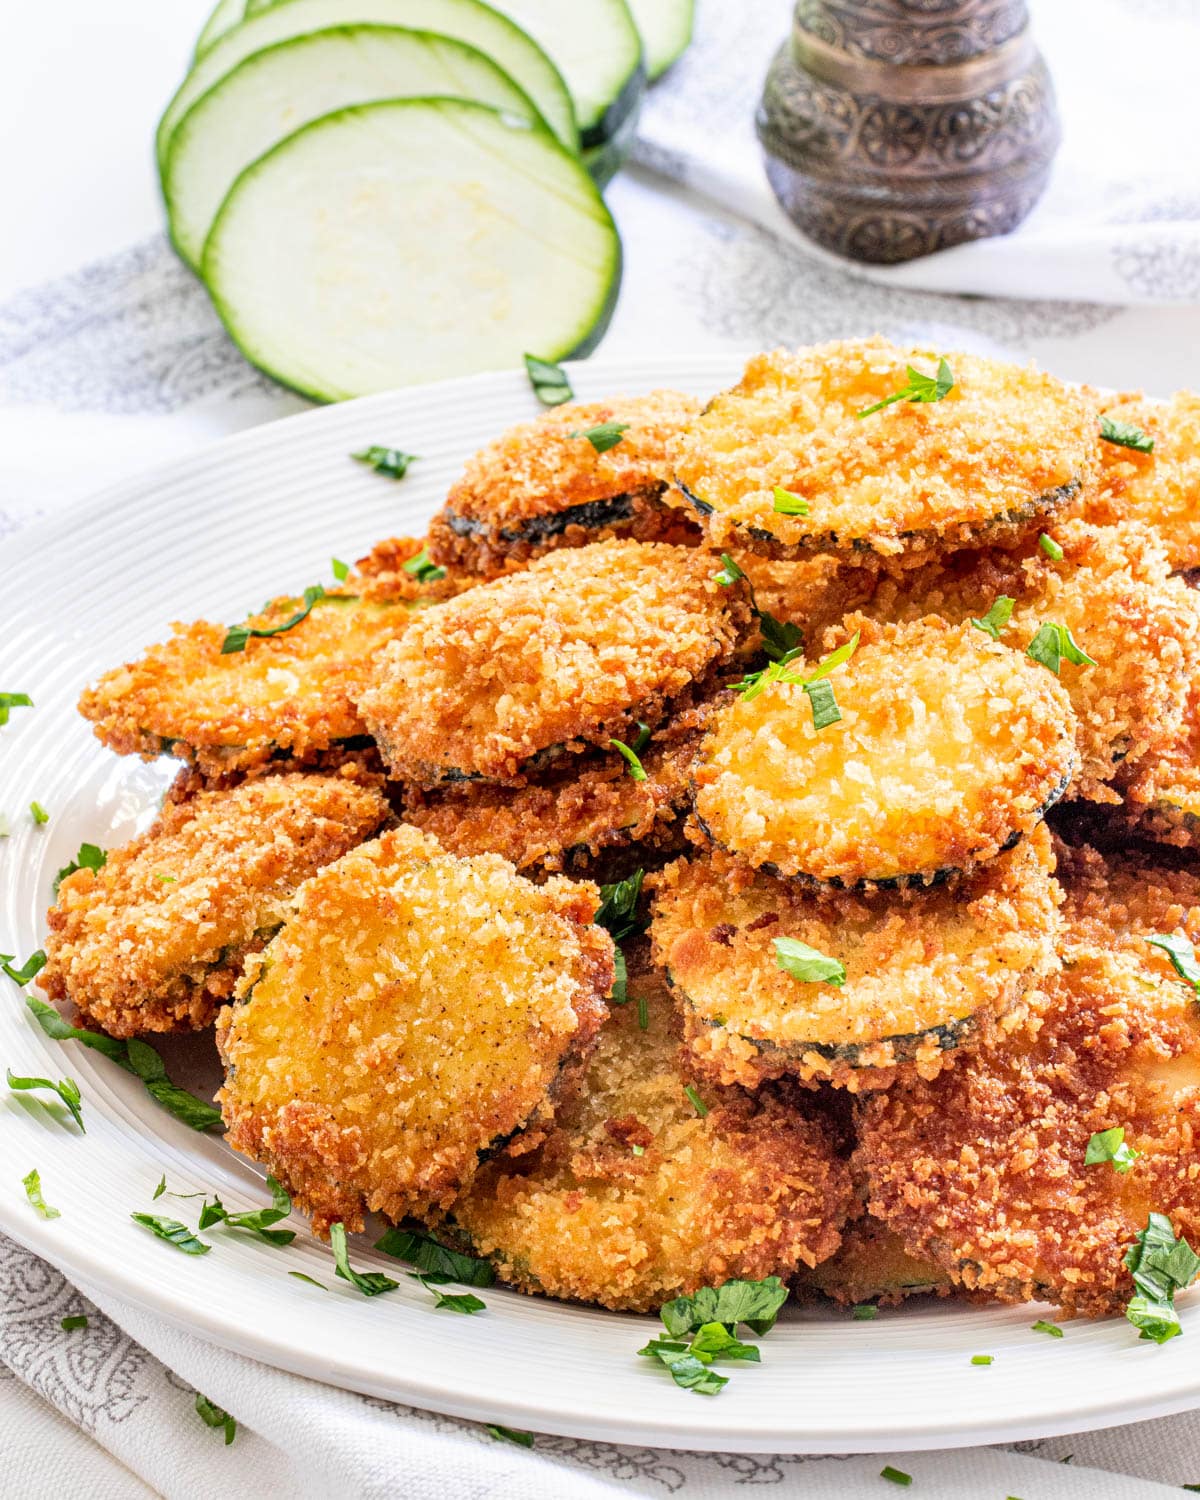 Crispy Fried Zucchini - Craving Home Cooked